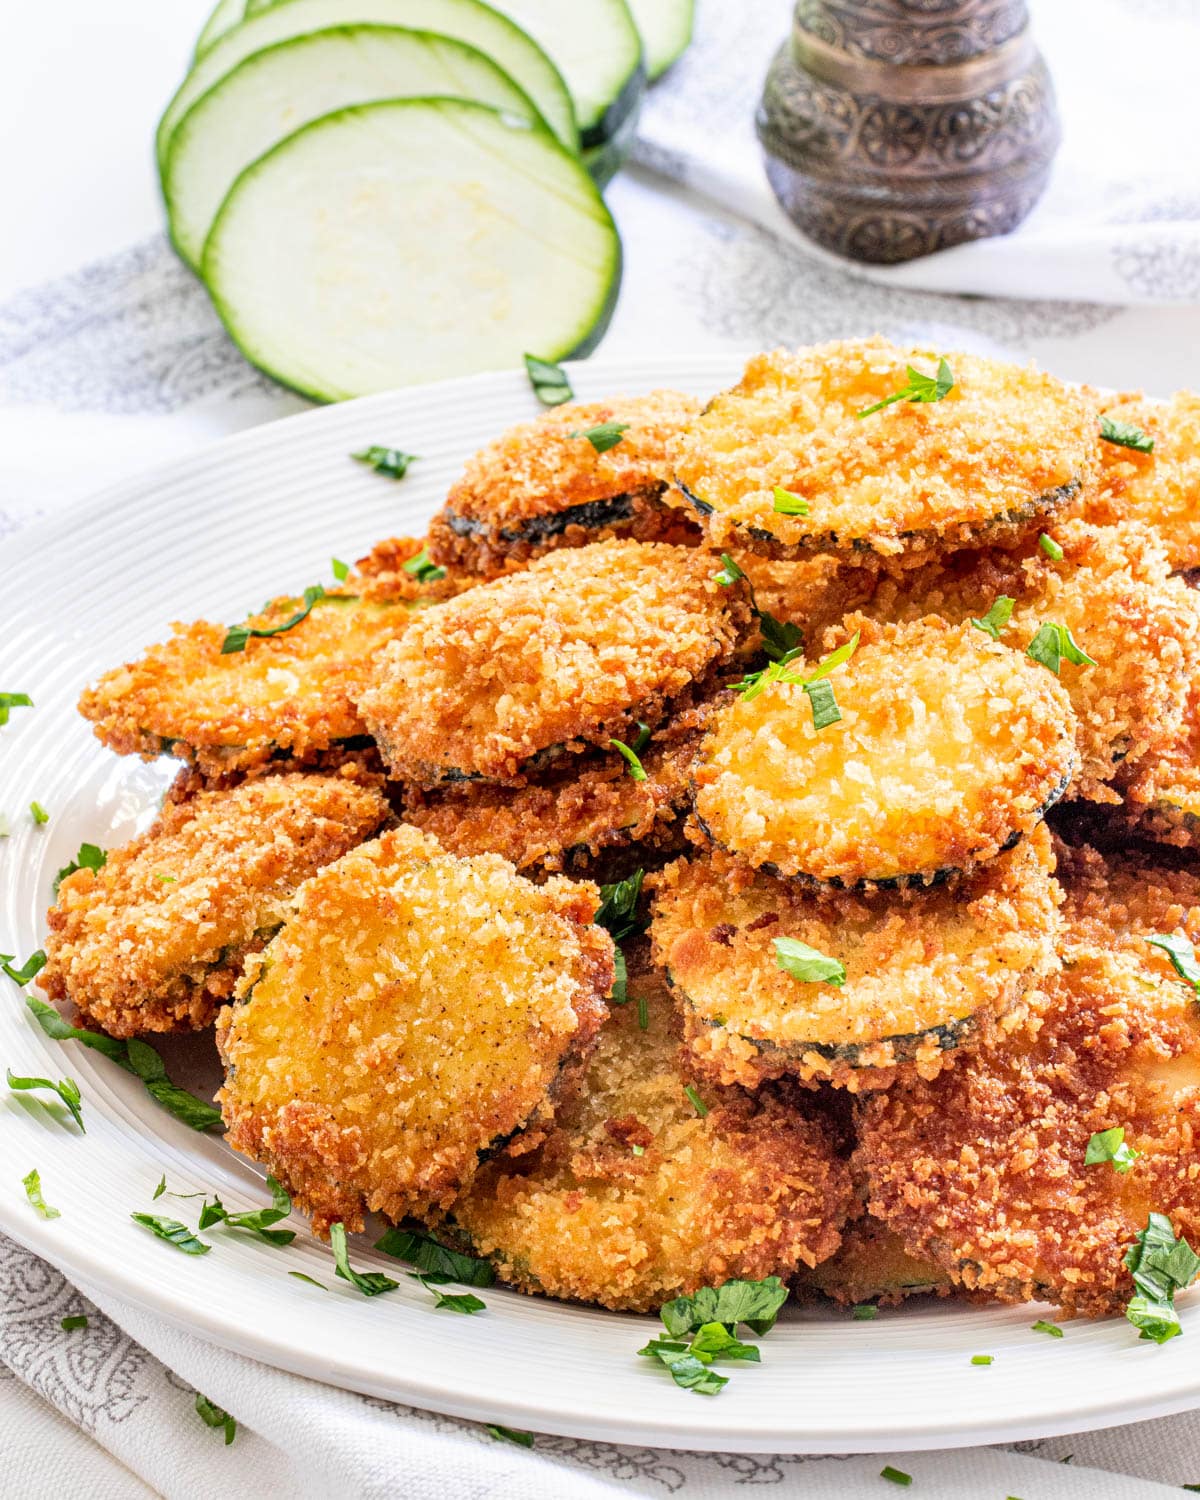 Crispy Fried Zucchini - Craving Home Cooked